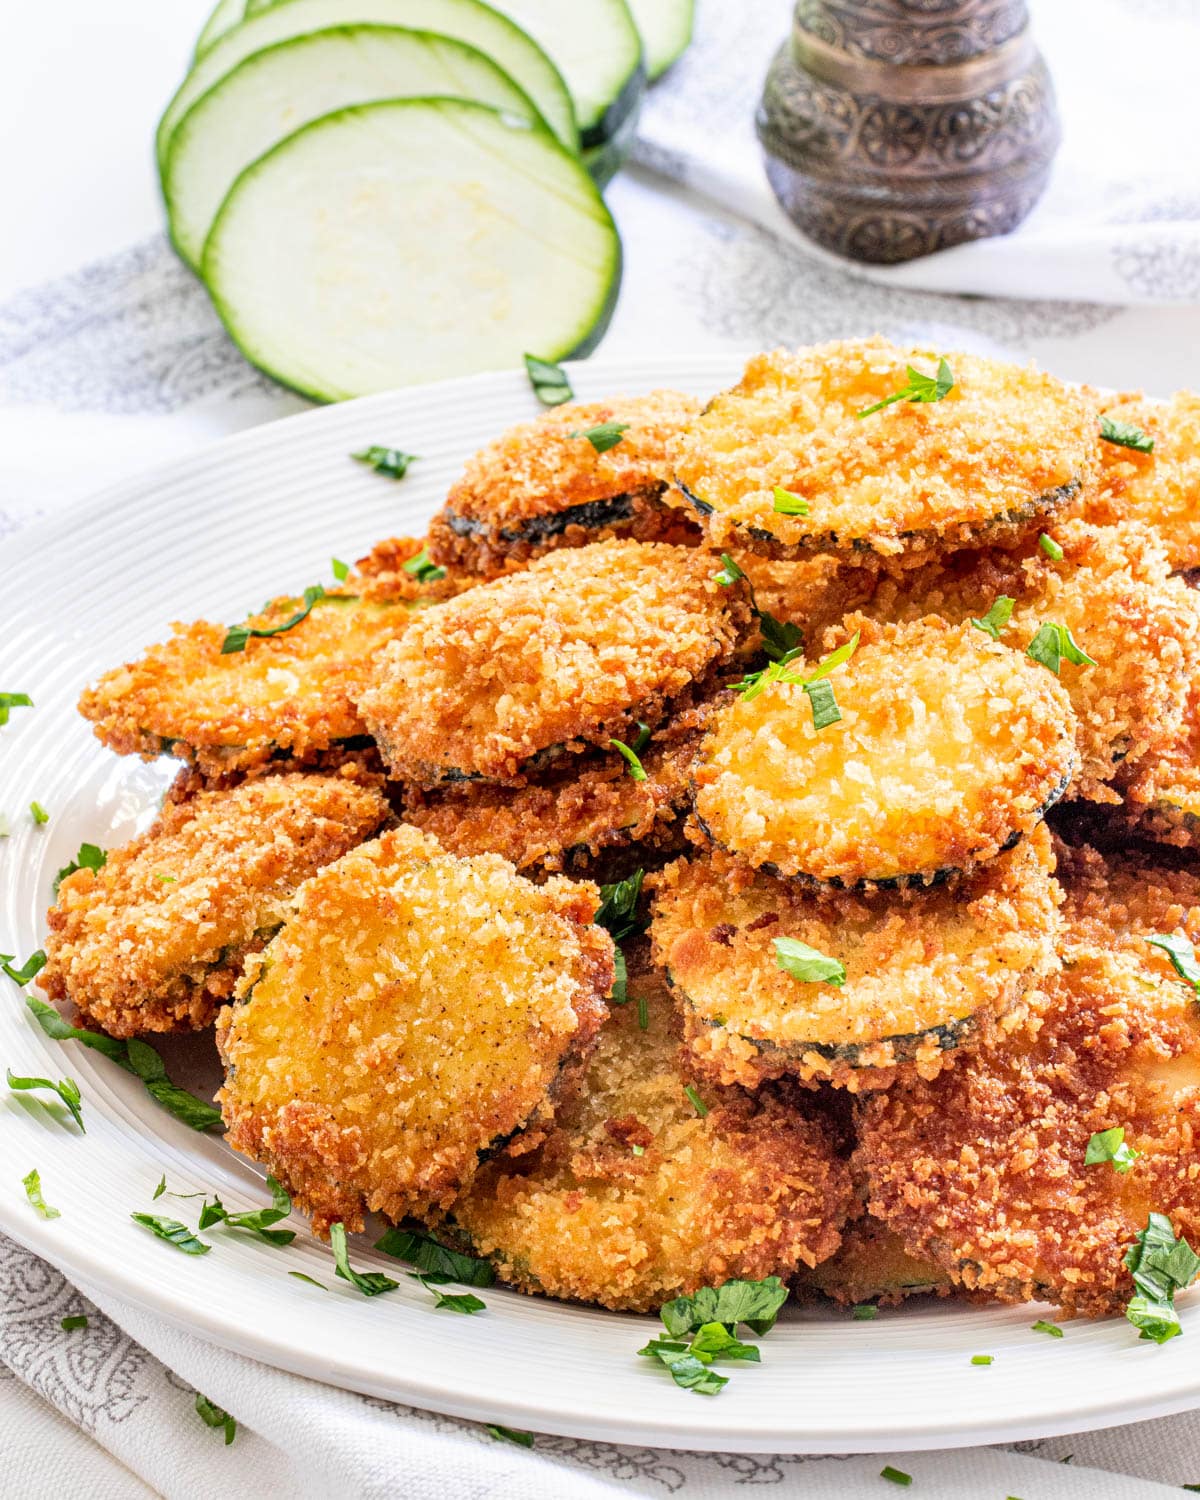 Crispy Fried Zucchini - Craving Home Cooked